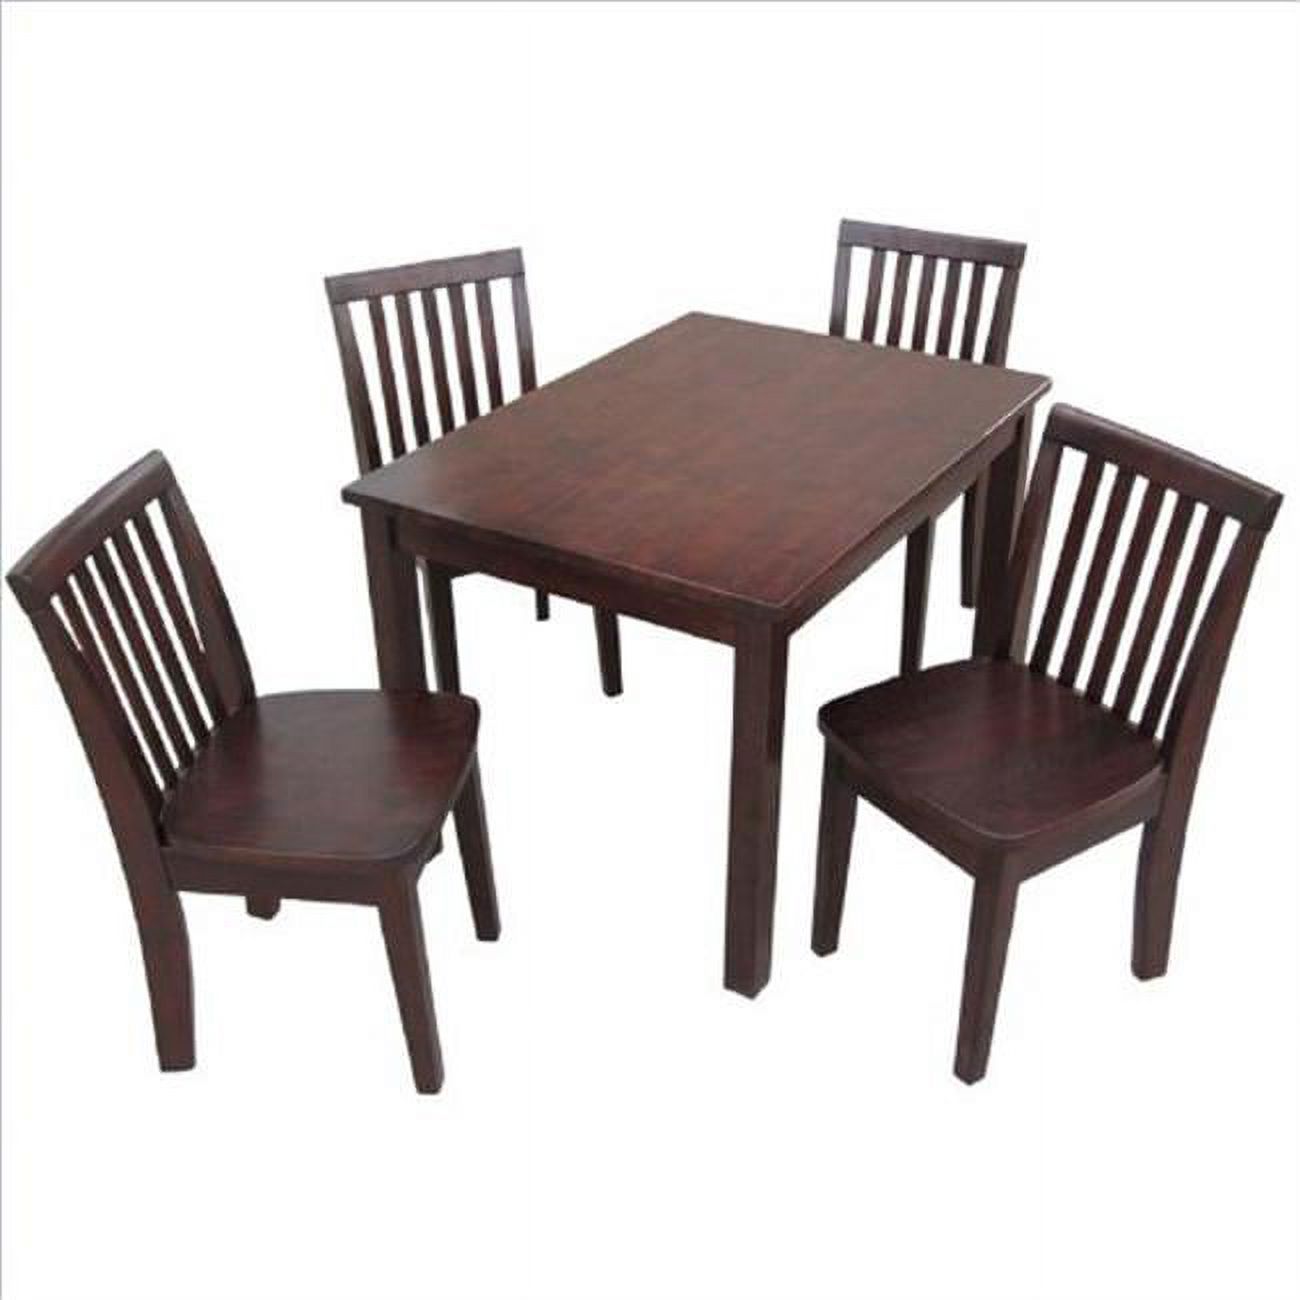 Set of 5 pcs - 2532 Table with 4 mission juvenile chairs  Rich Mocha - image 1 of 1